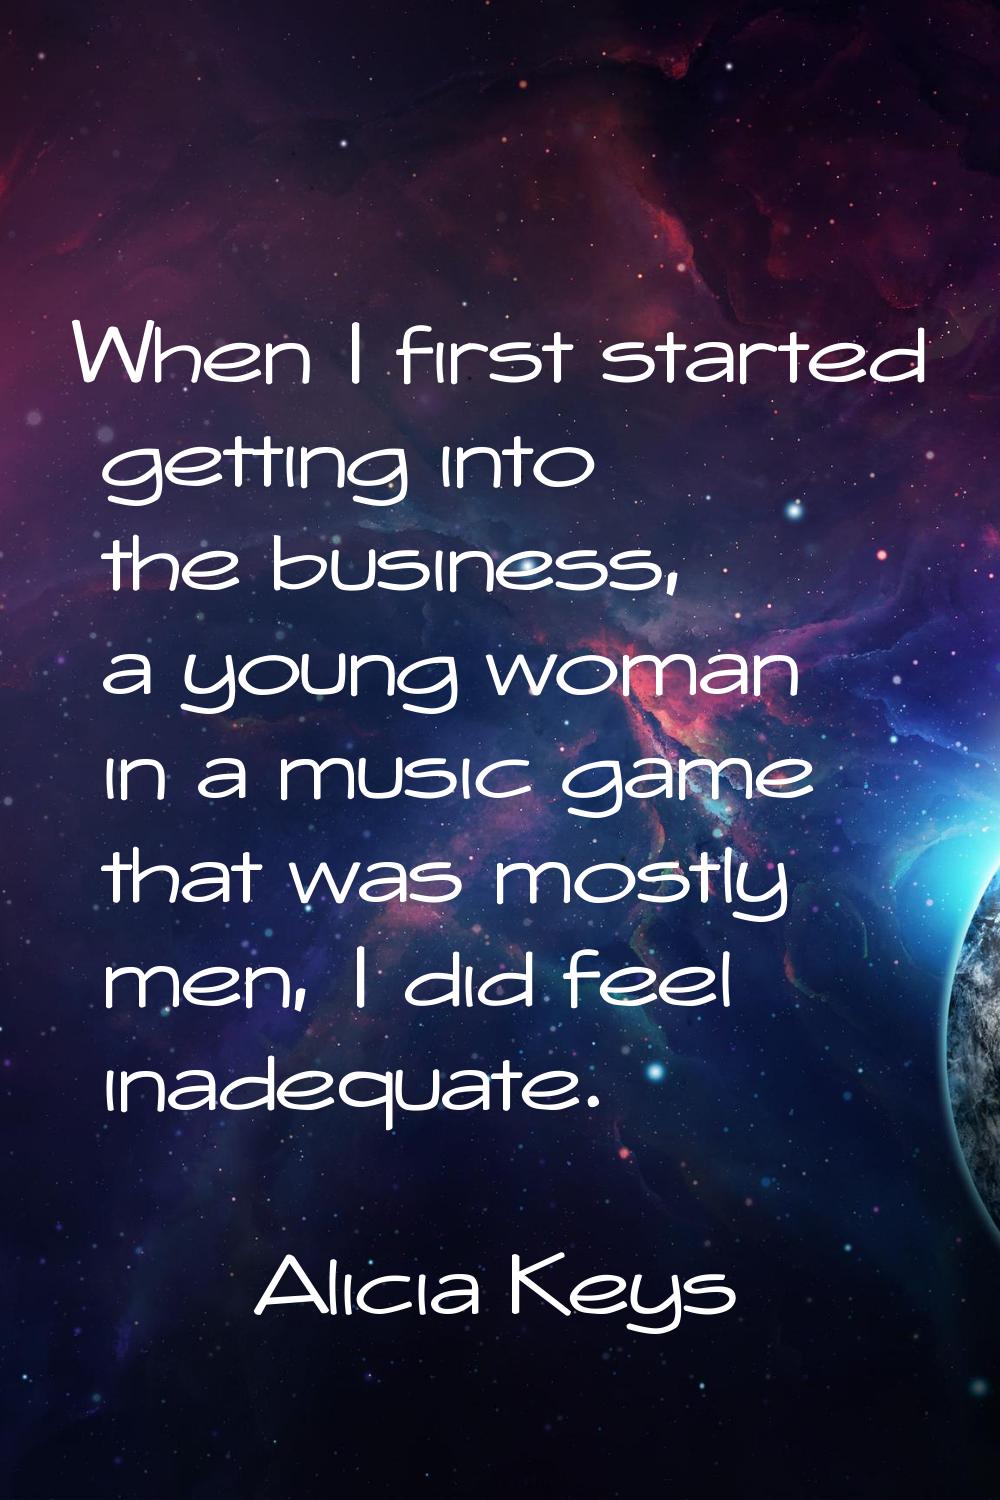 When I first started getting into the business, a young woman in a music game that was mostly men, 